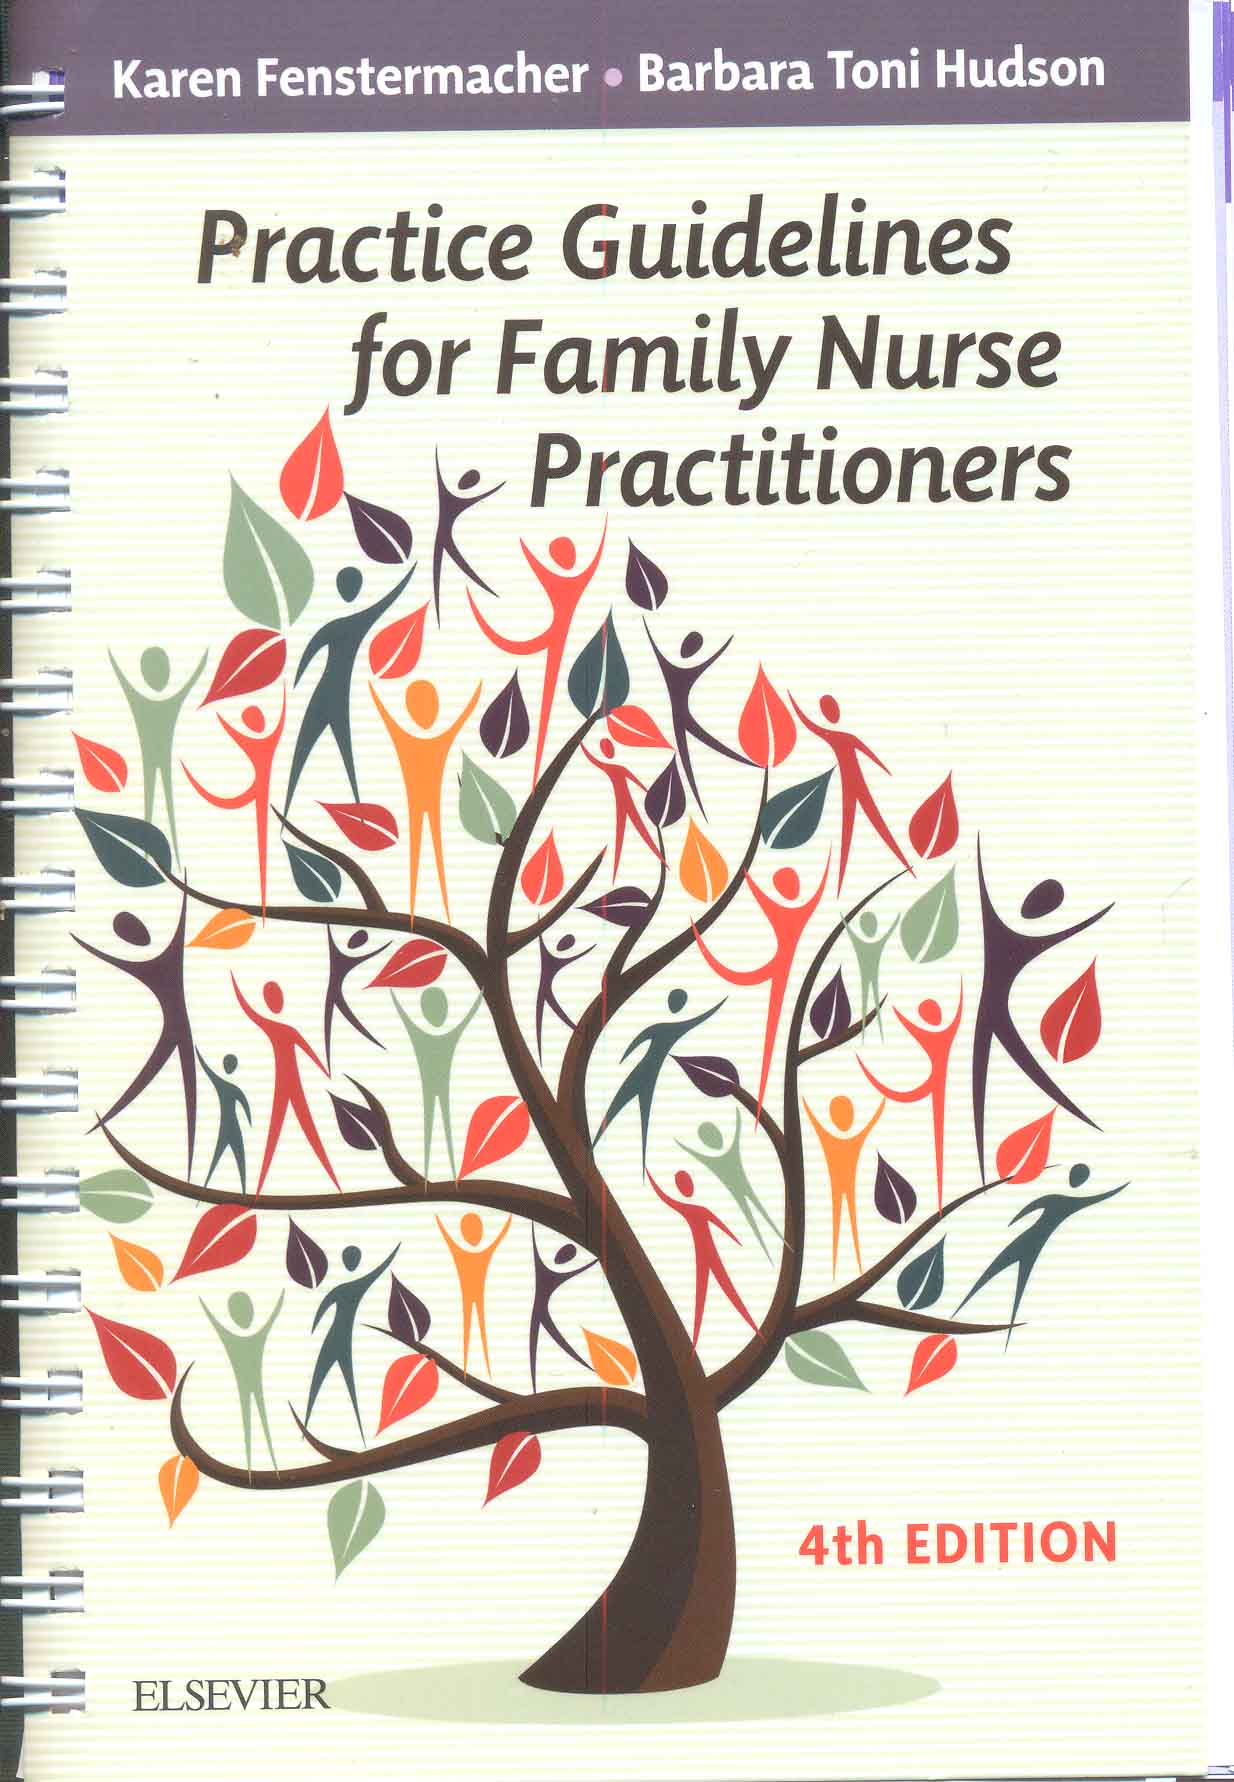 Practice guidelines for family nurse practitioners